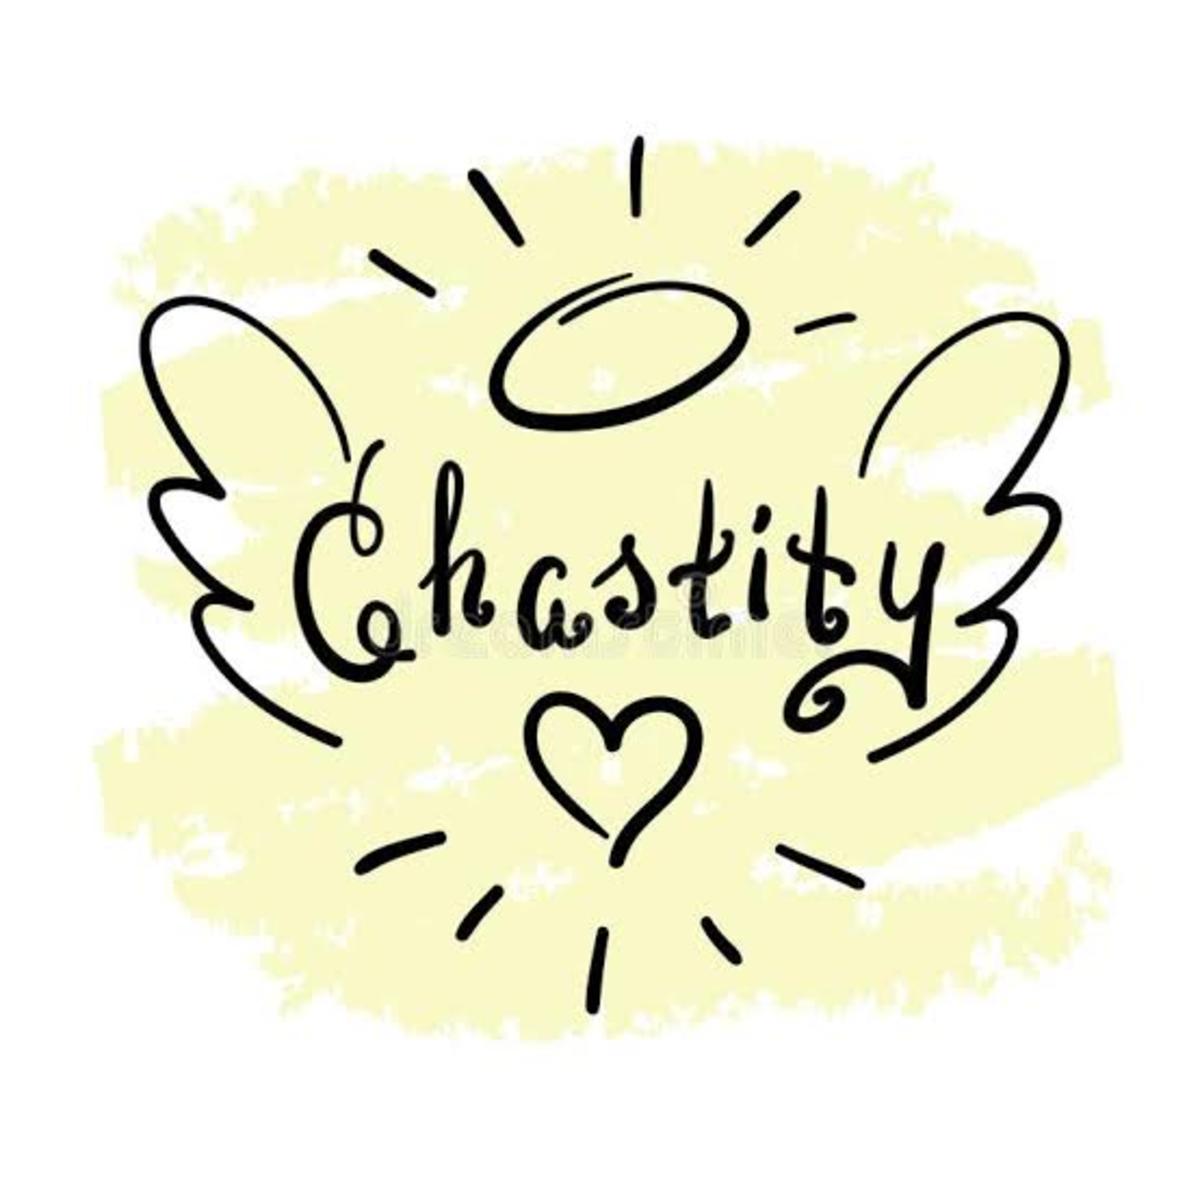 chastity-and-unchastity